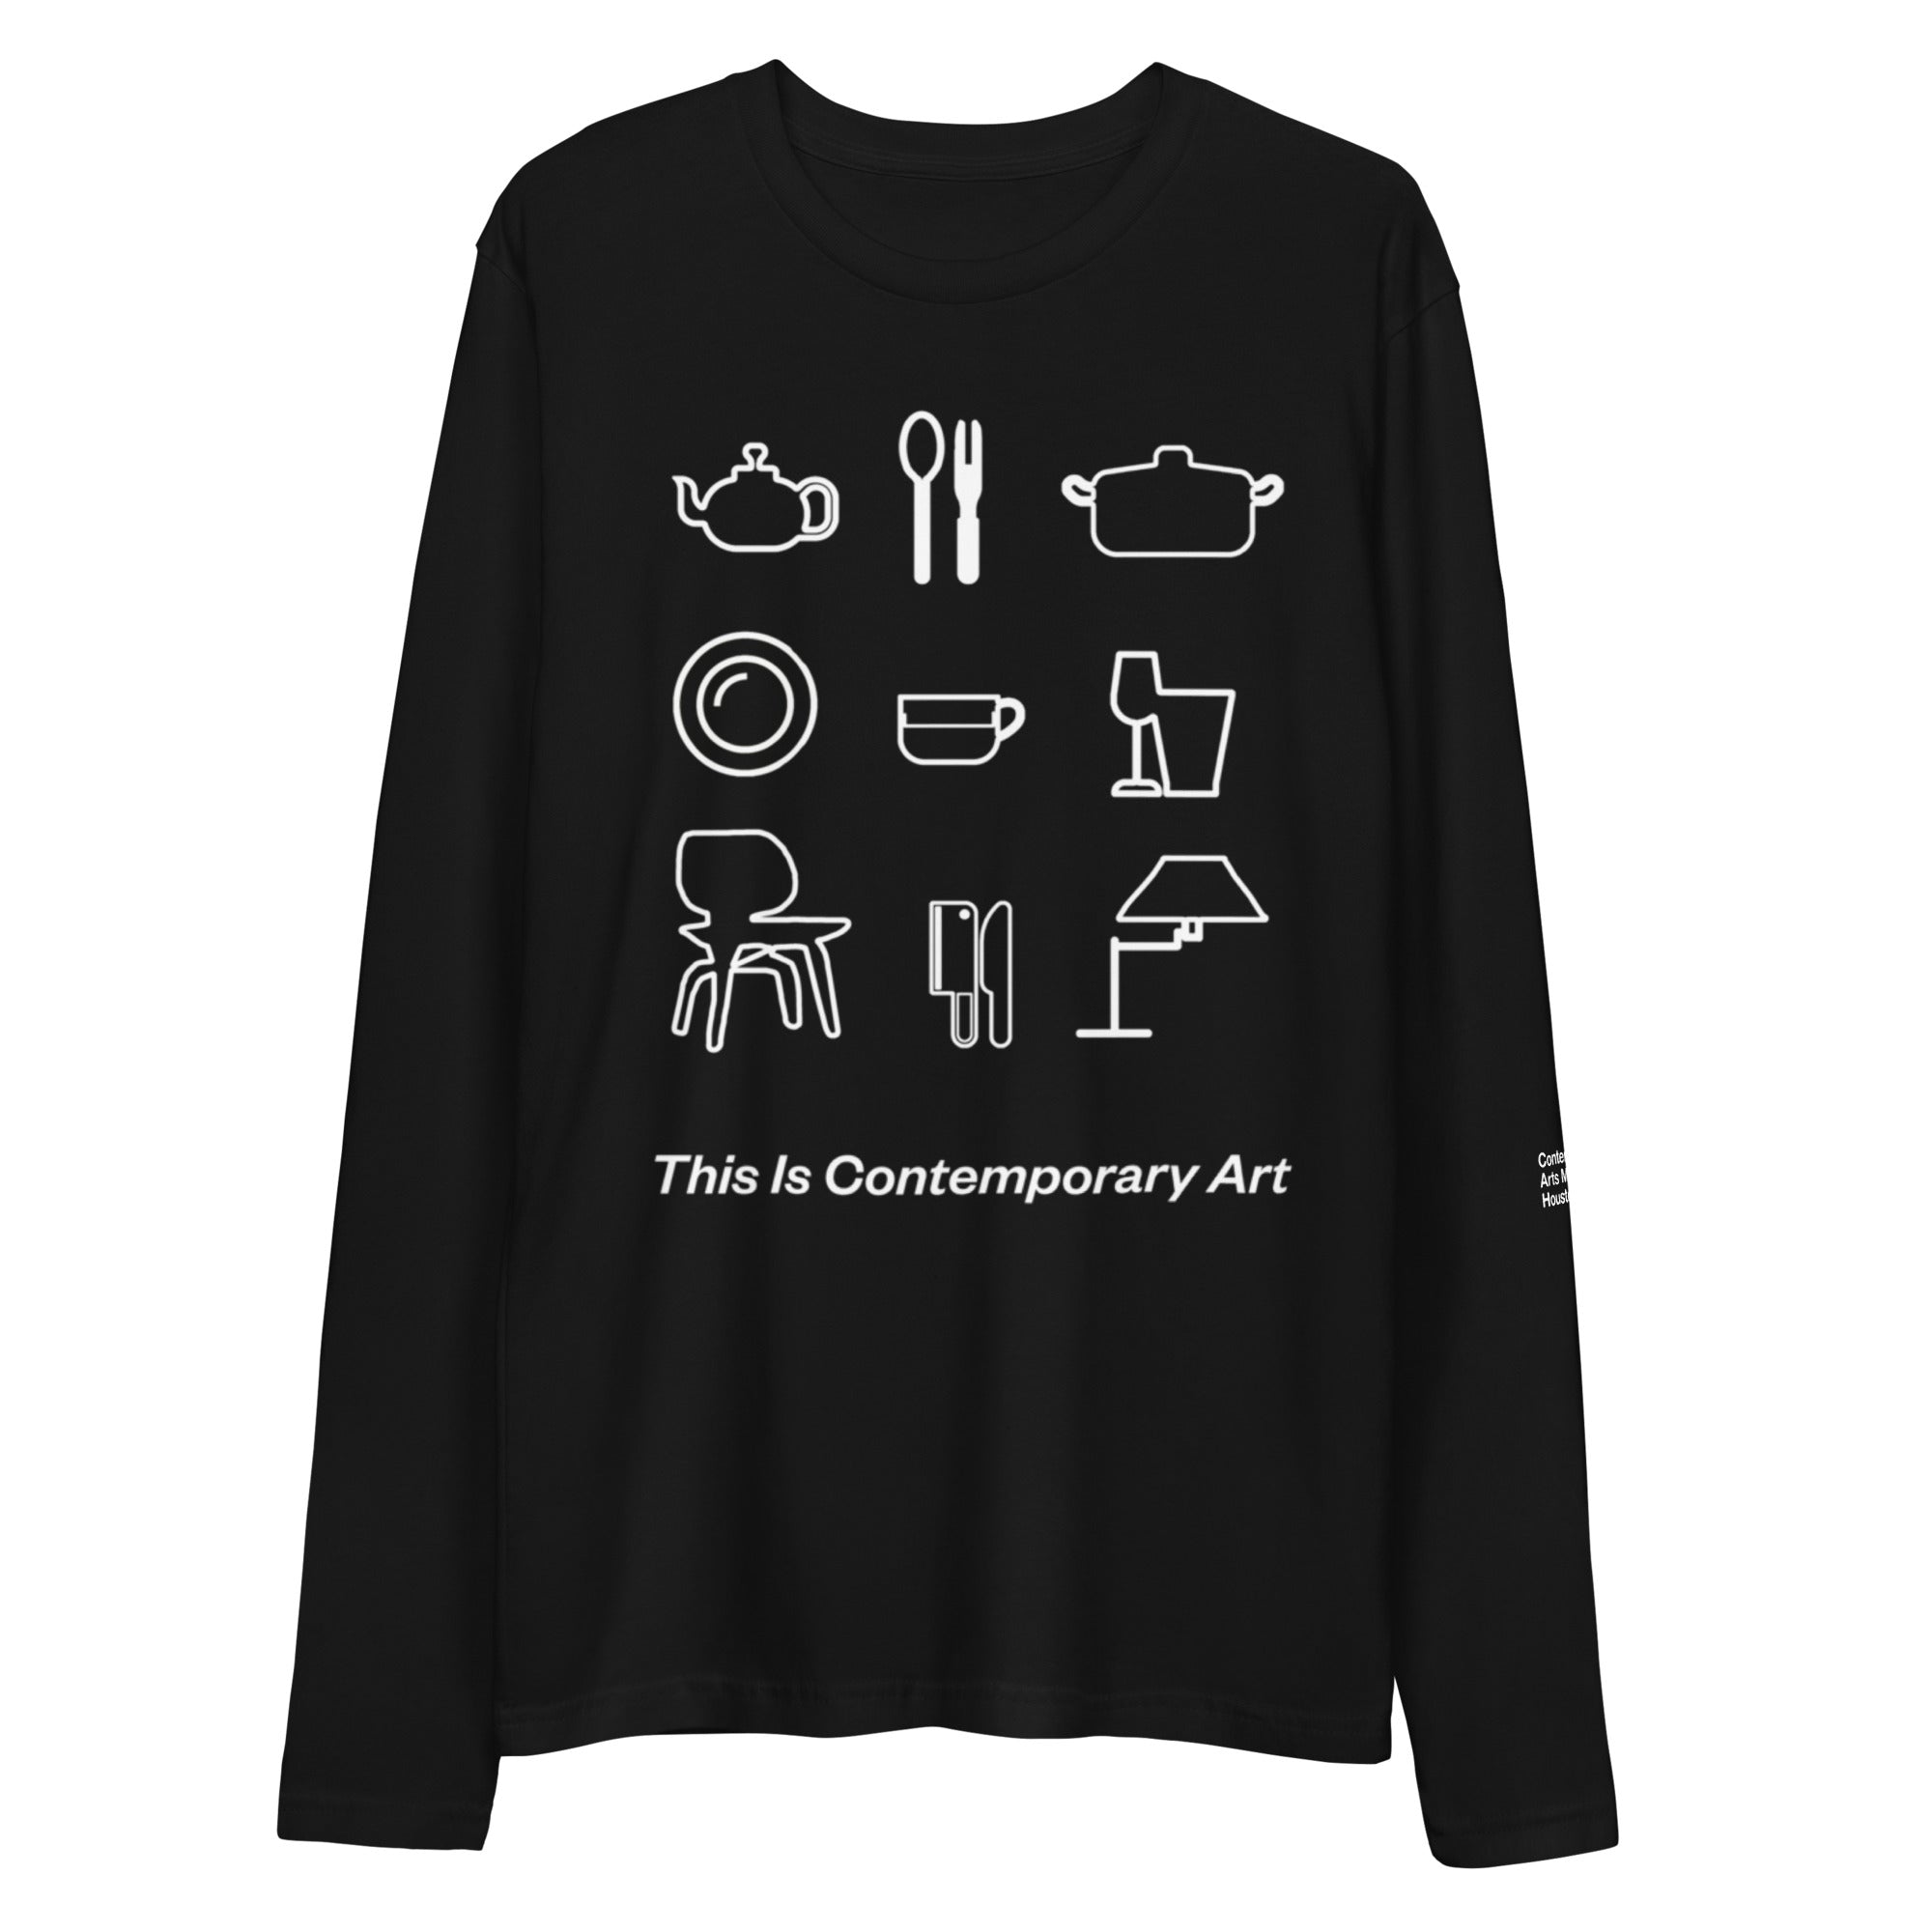 This Is Contemporary Art Tee